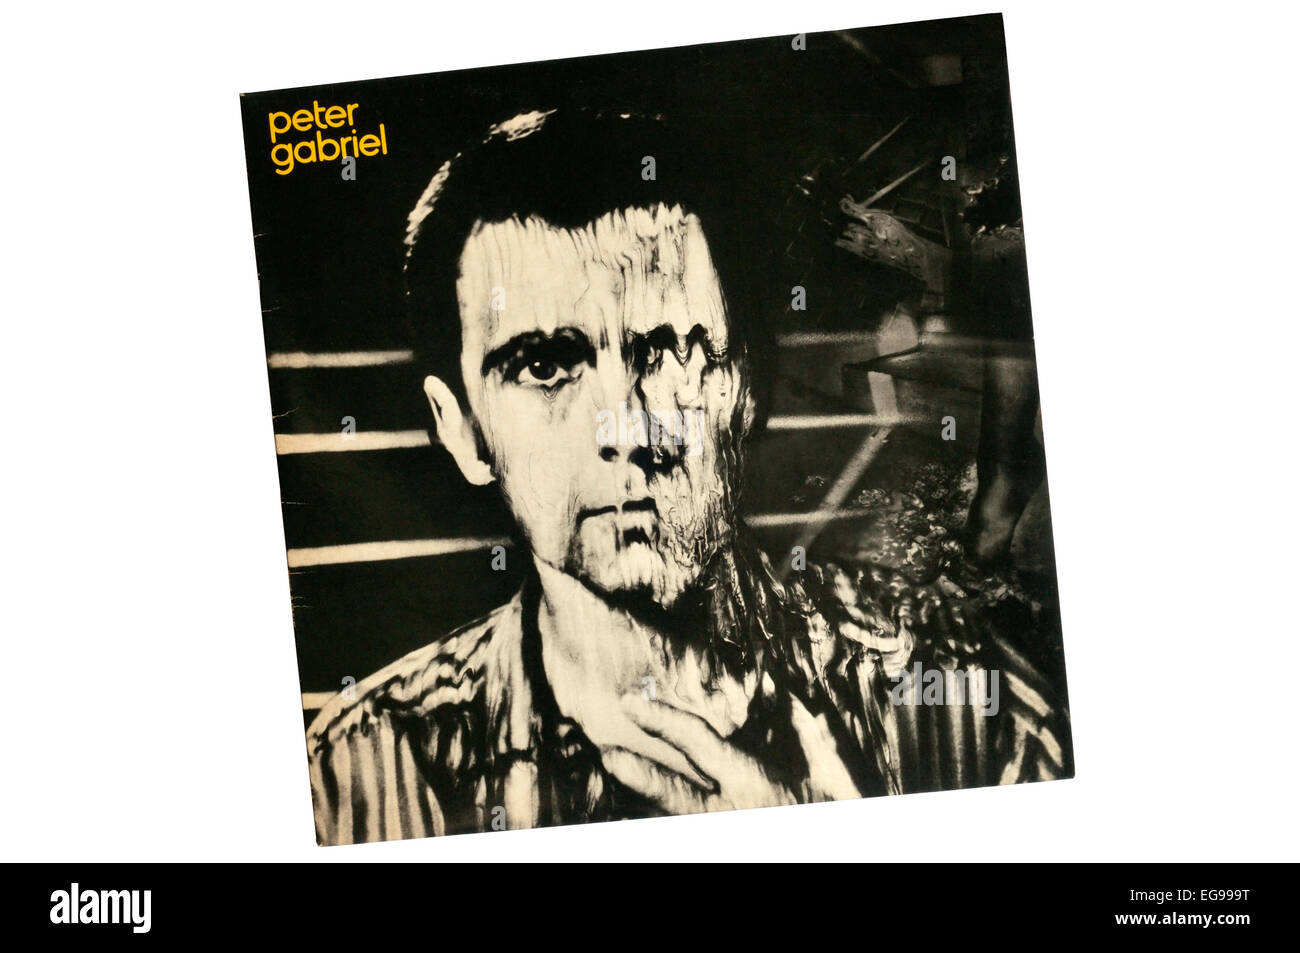 Peter Gabriel is 3rd album by British musician Peter Gabriel, released in May 1980.  The cover photograph is by Hipgnosis. Stock Photo